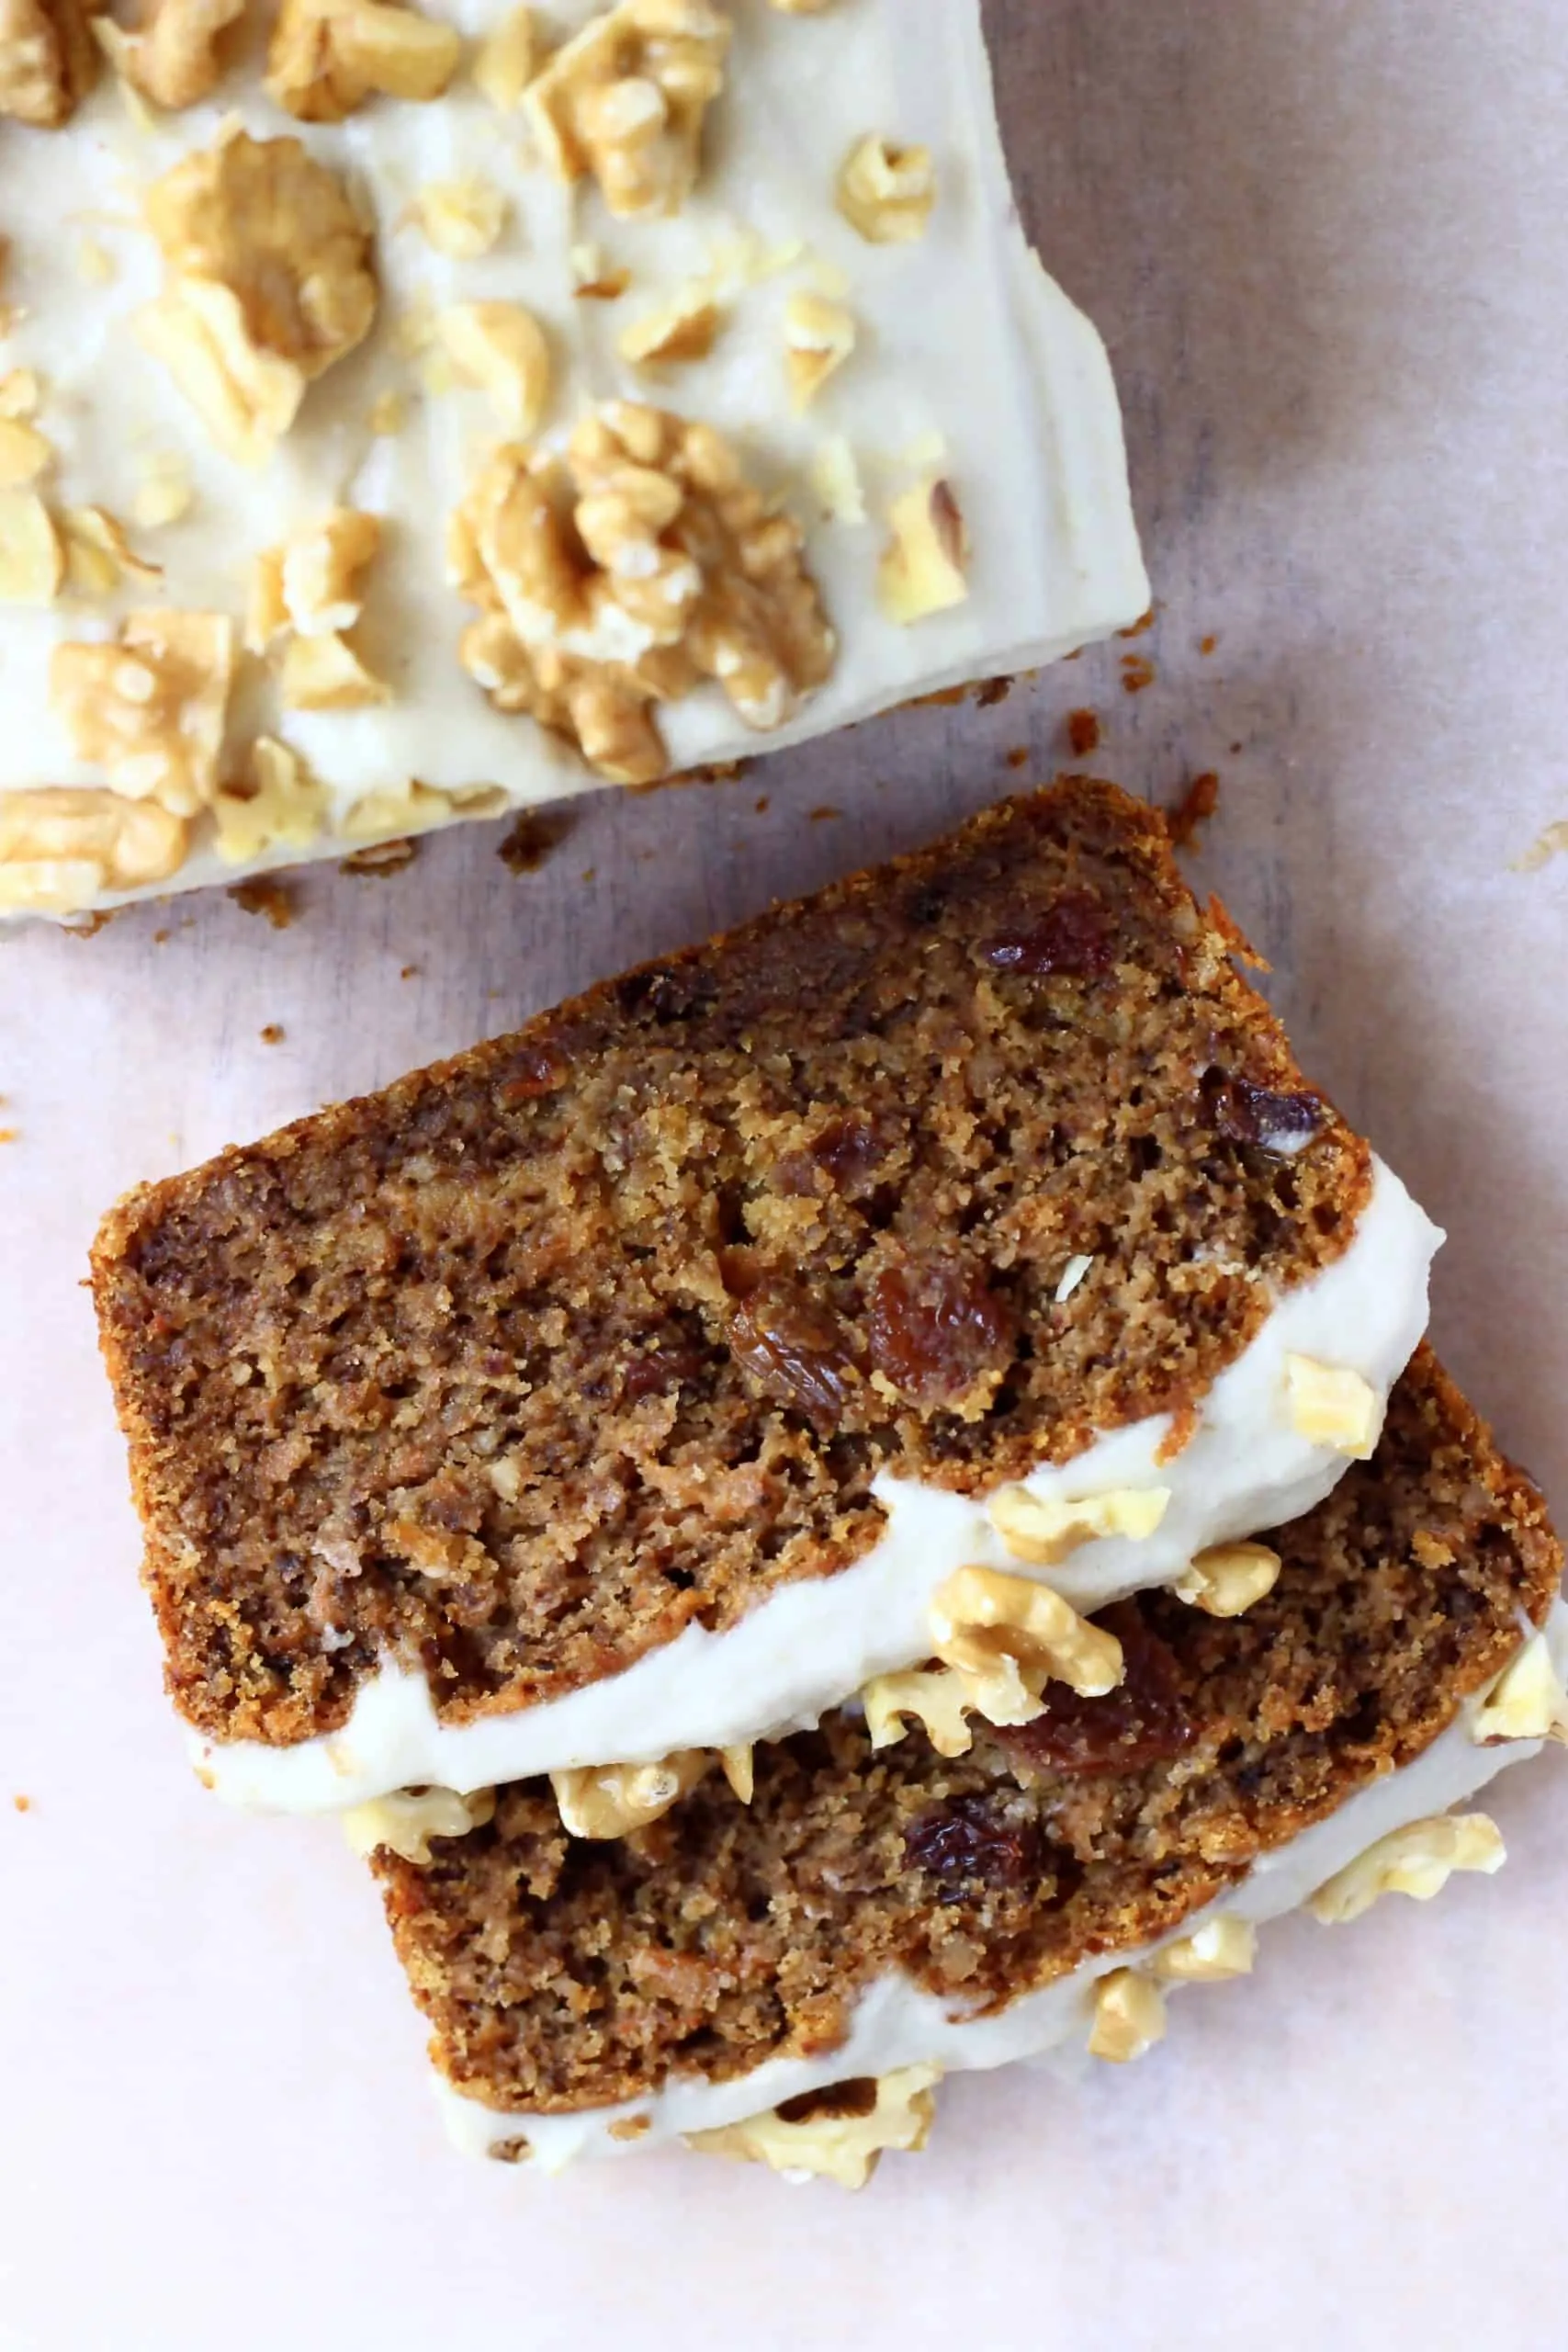 A loaf of vegan carrot bread topped with frosting and walnuts with two slices next to it